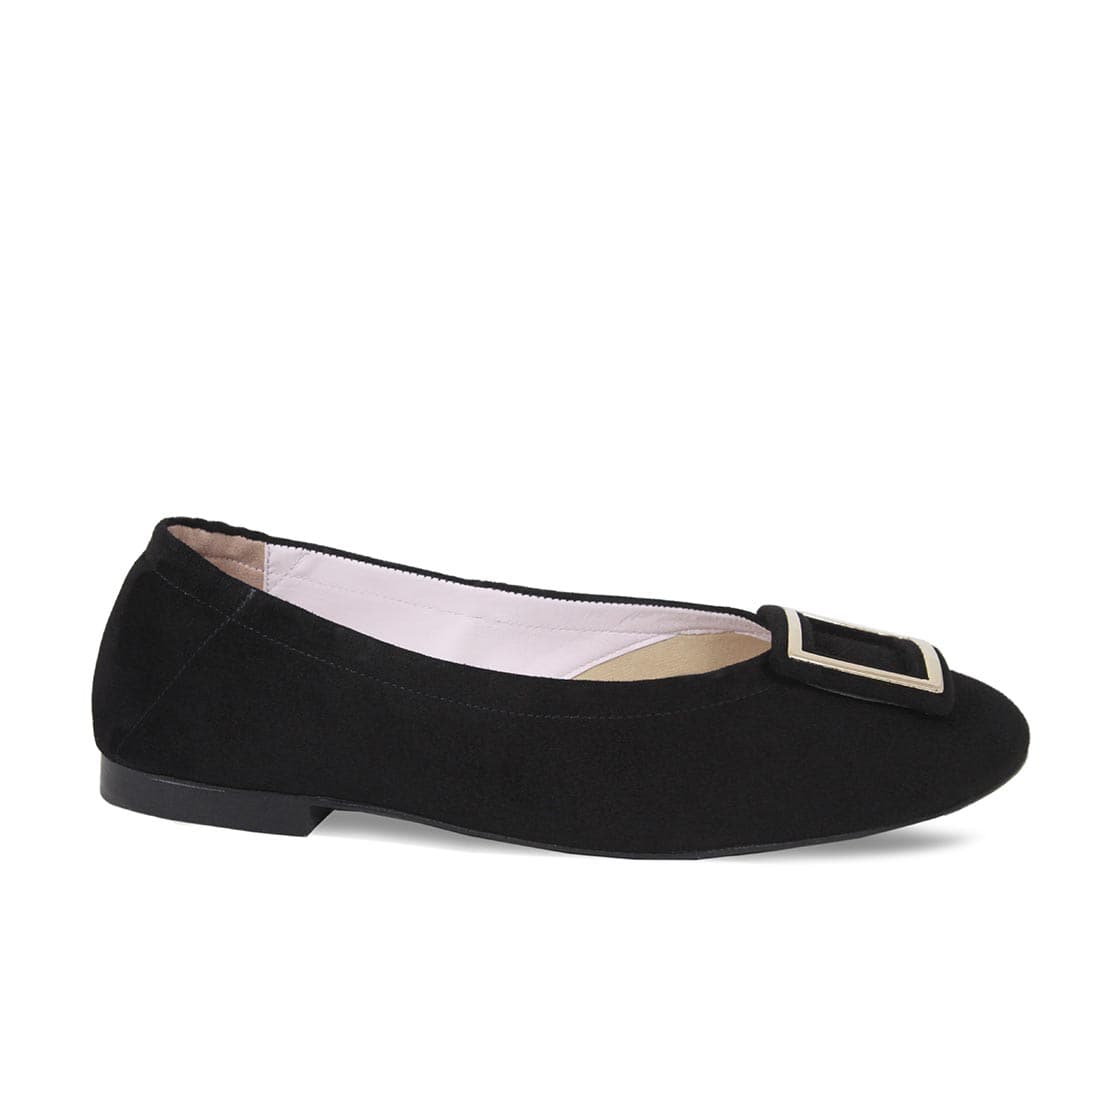 Black Suede Ballet Flat with Buckle